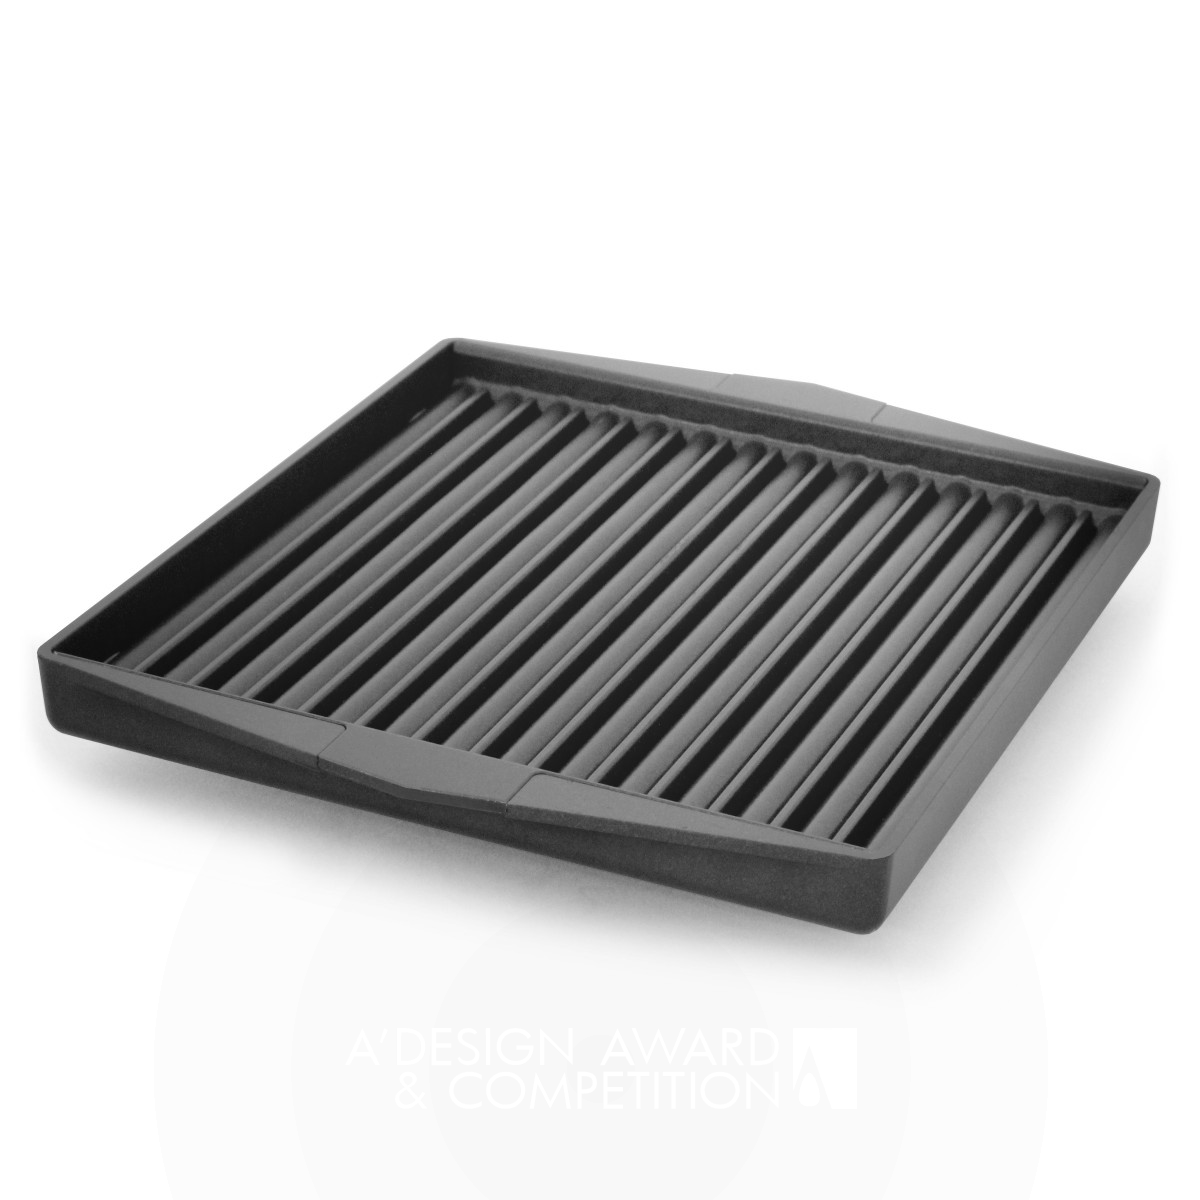 MiPan Grill Pan Cooking Surface